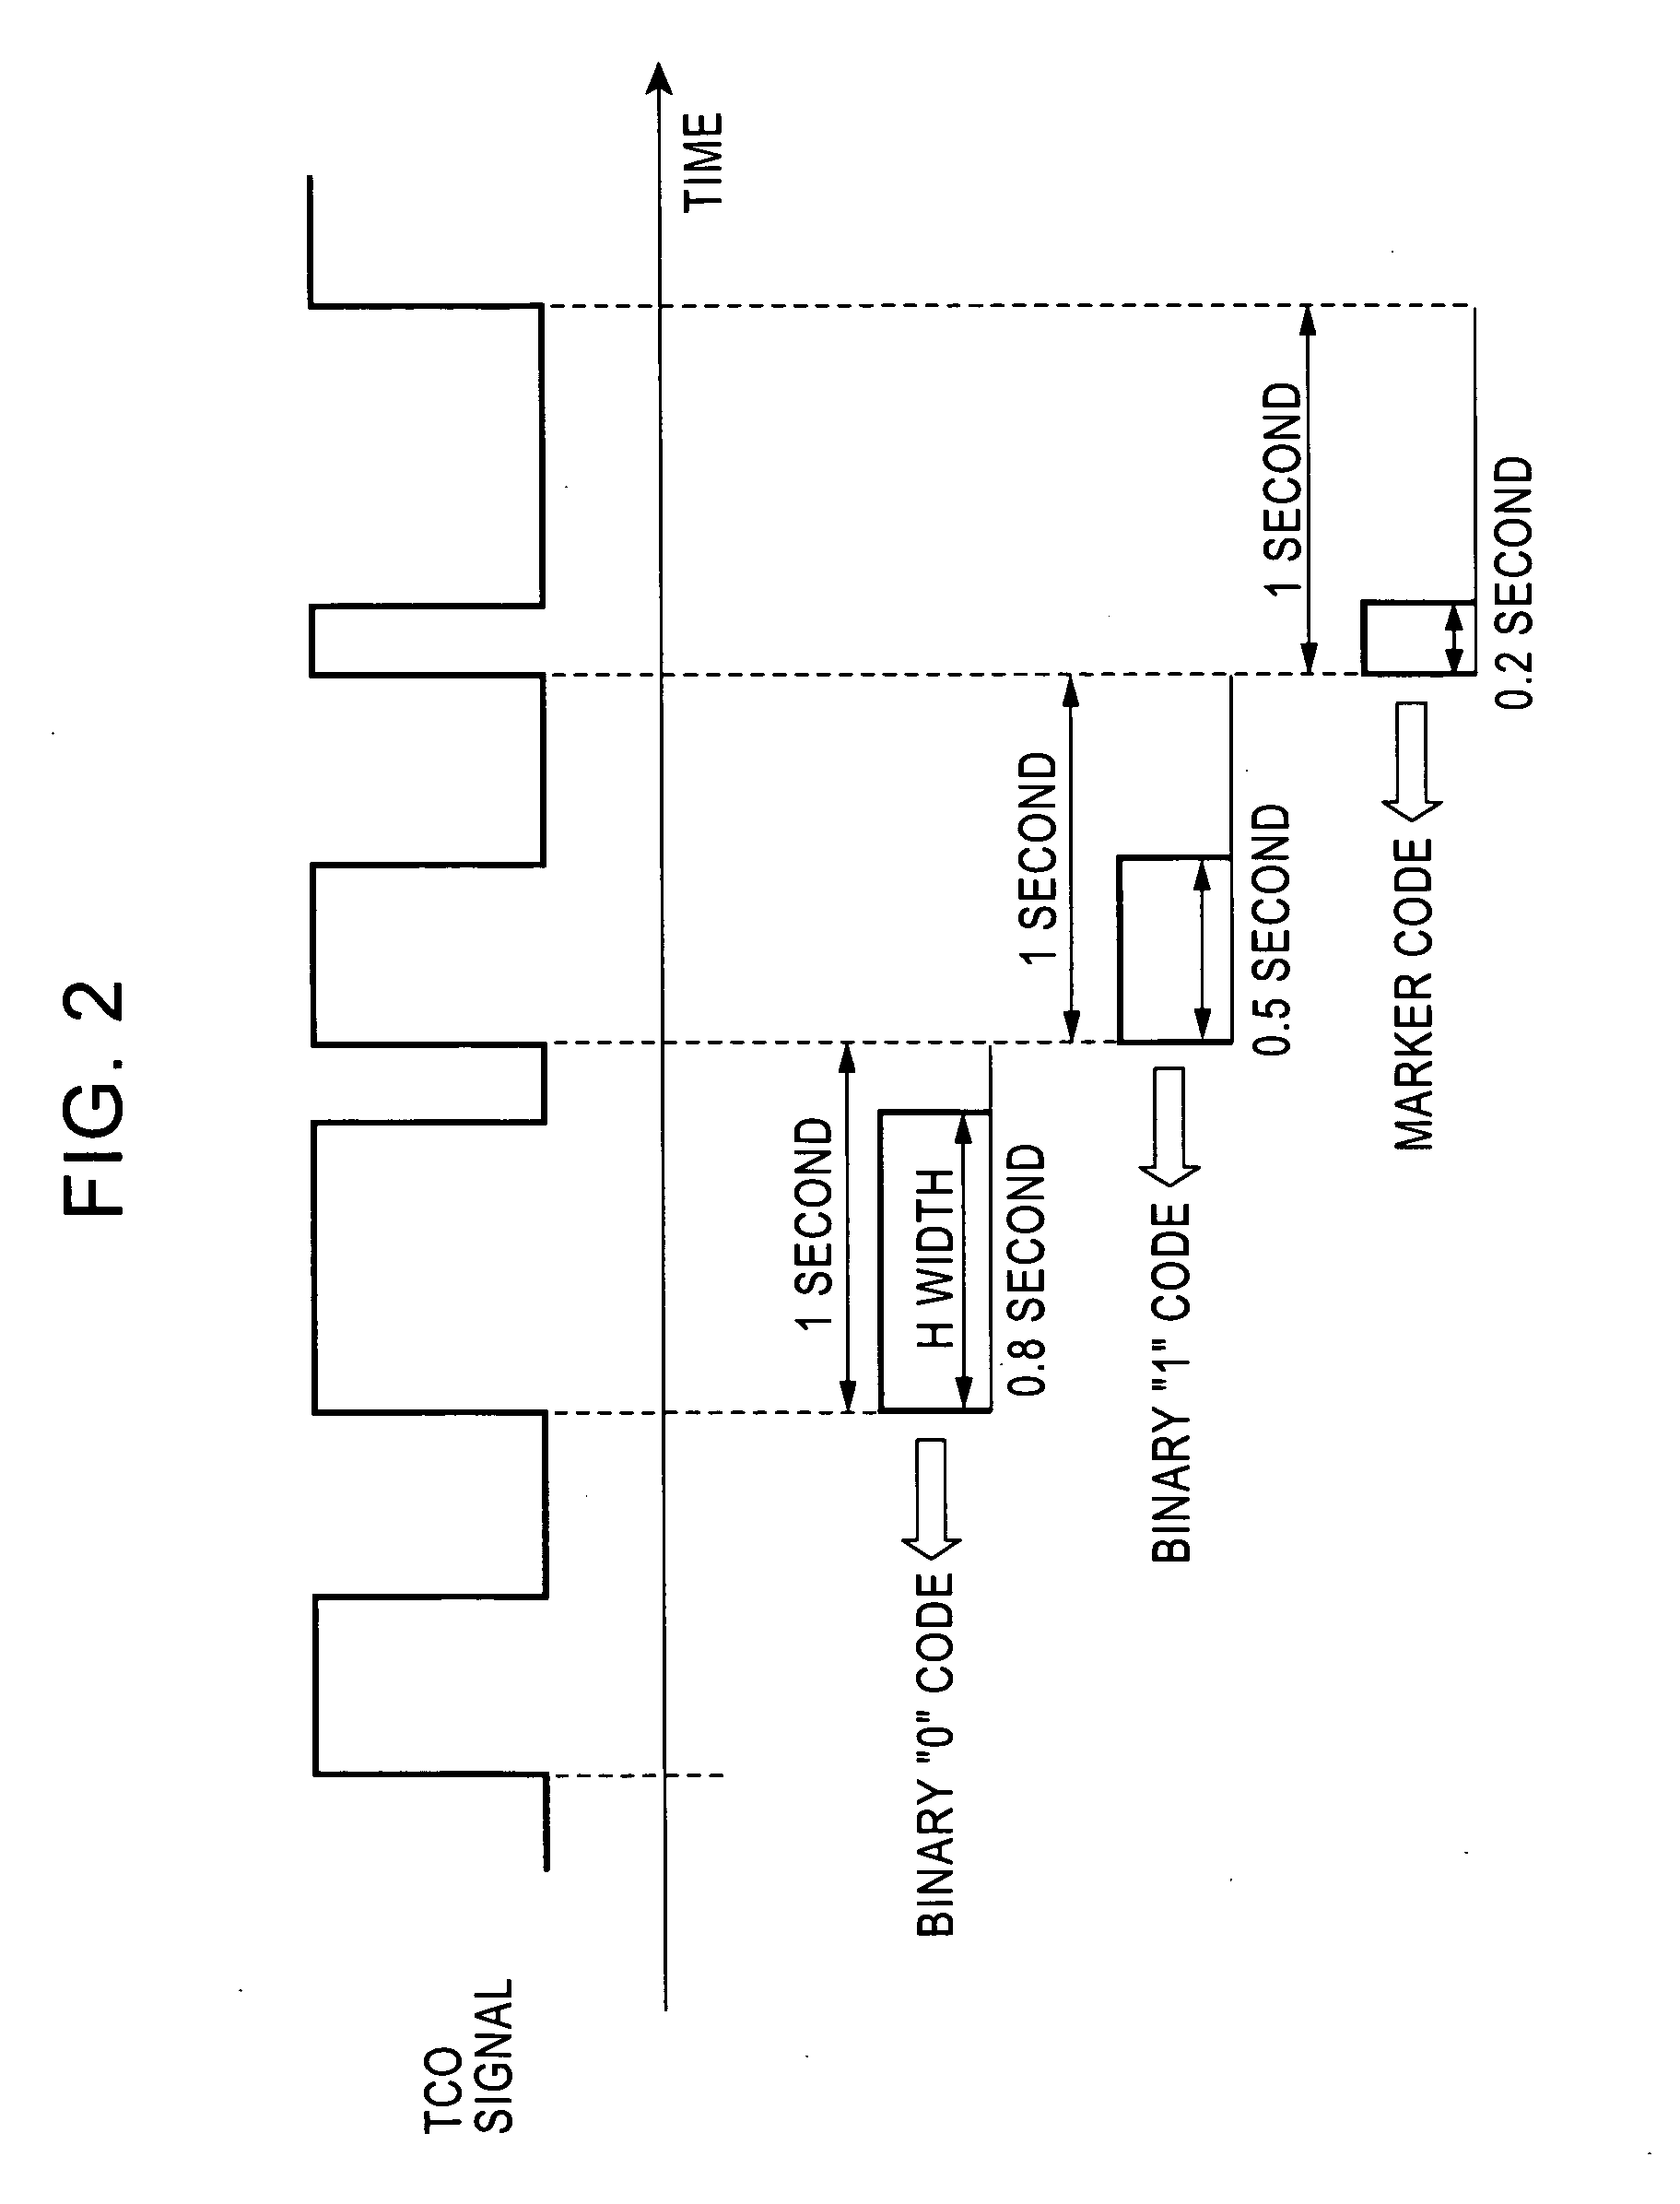 Standard wave receiver and time code decoding method